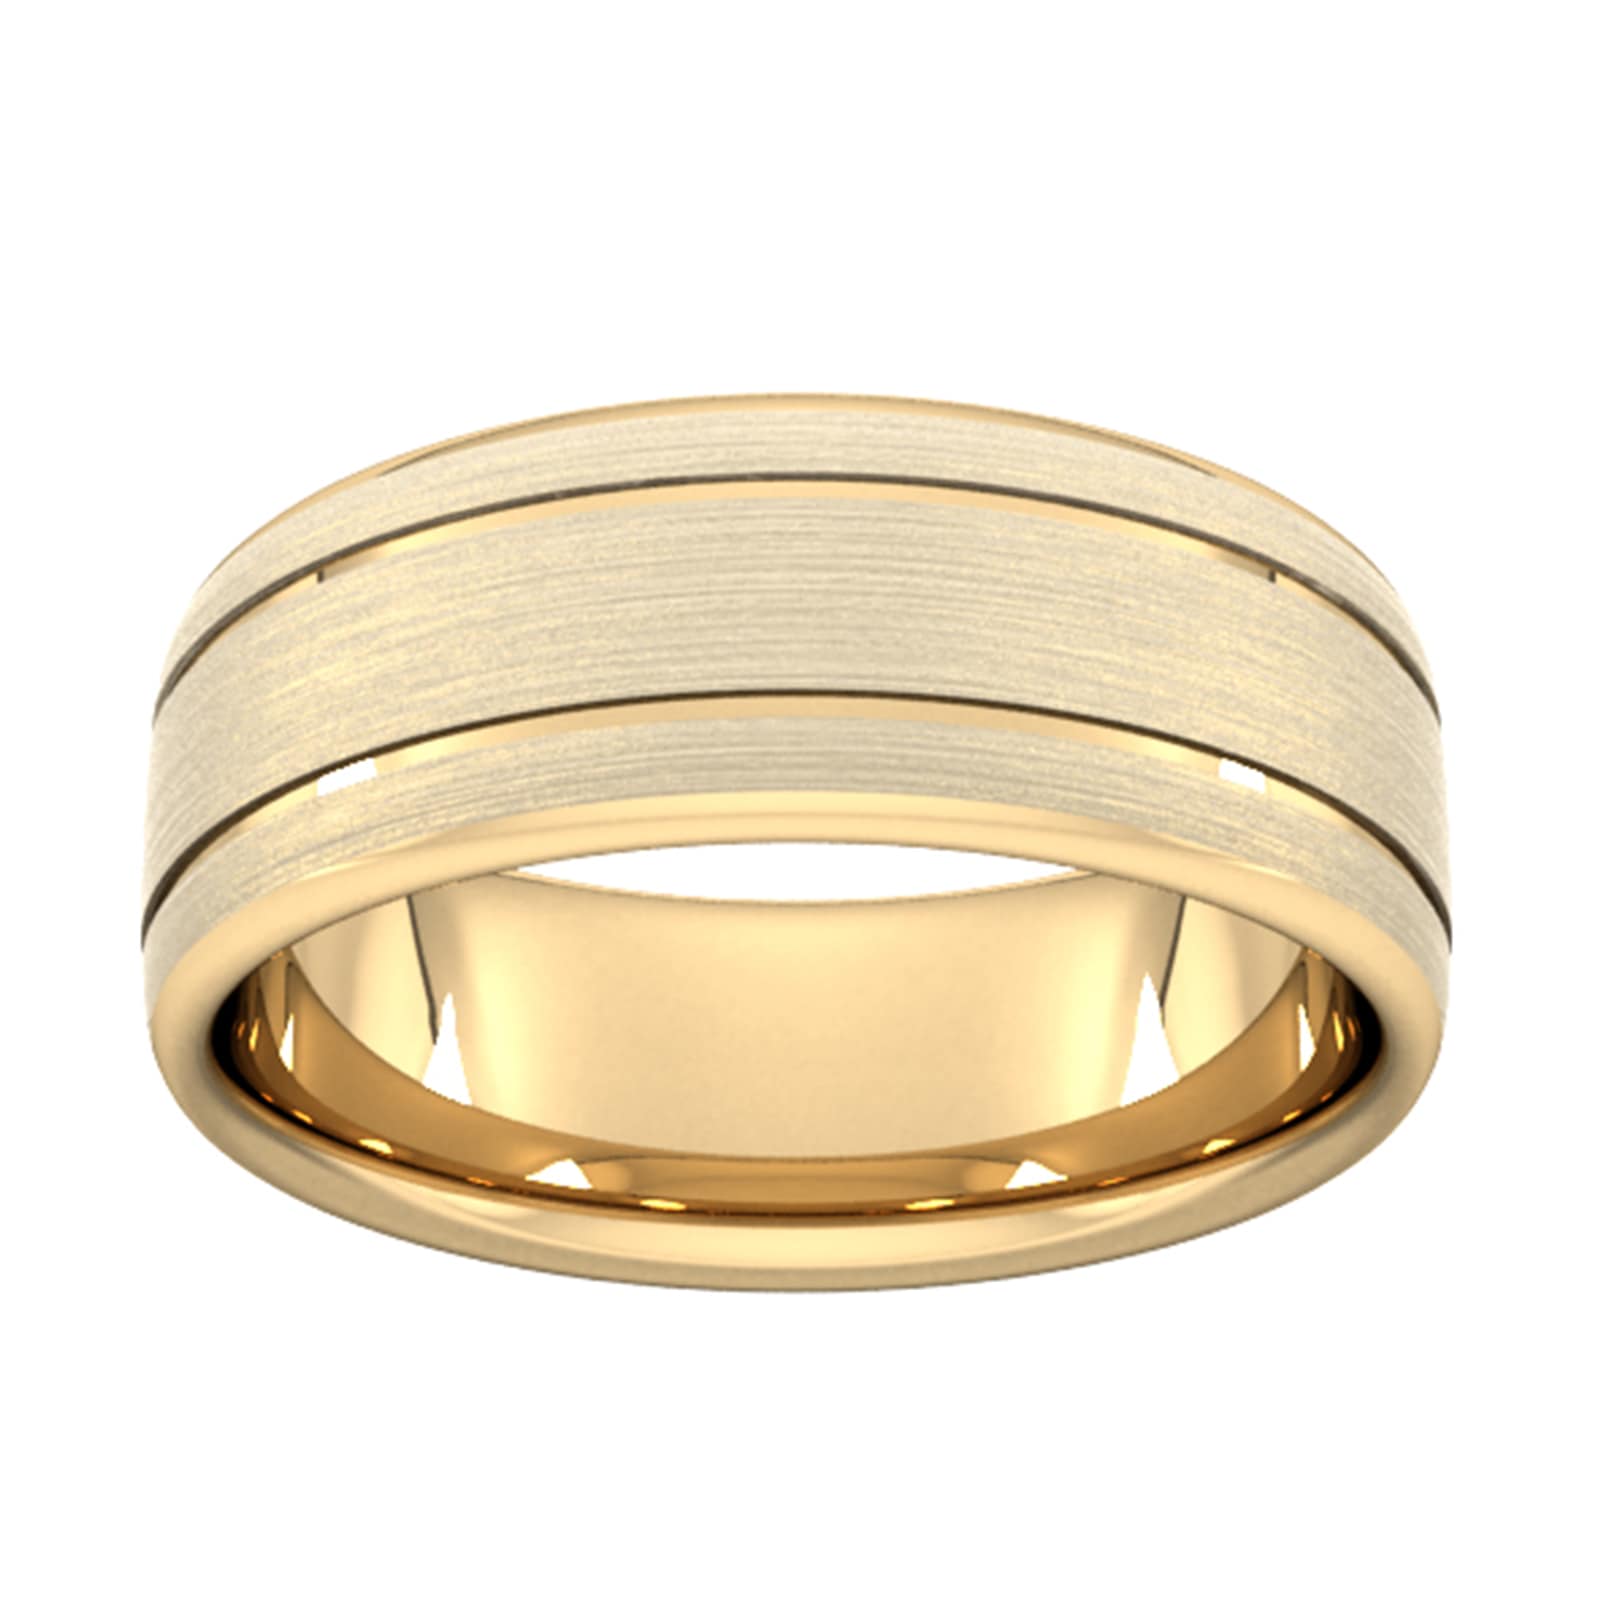 8mm D Shape Heavy Matt Finish With Double Grooves Wedding Ring In 9 Carat Yellow Gold - Ring Size N